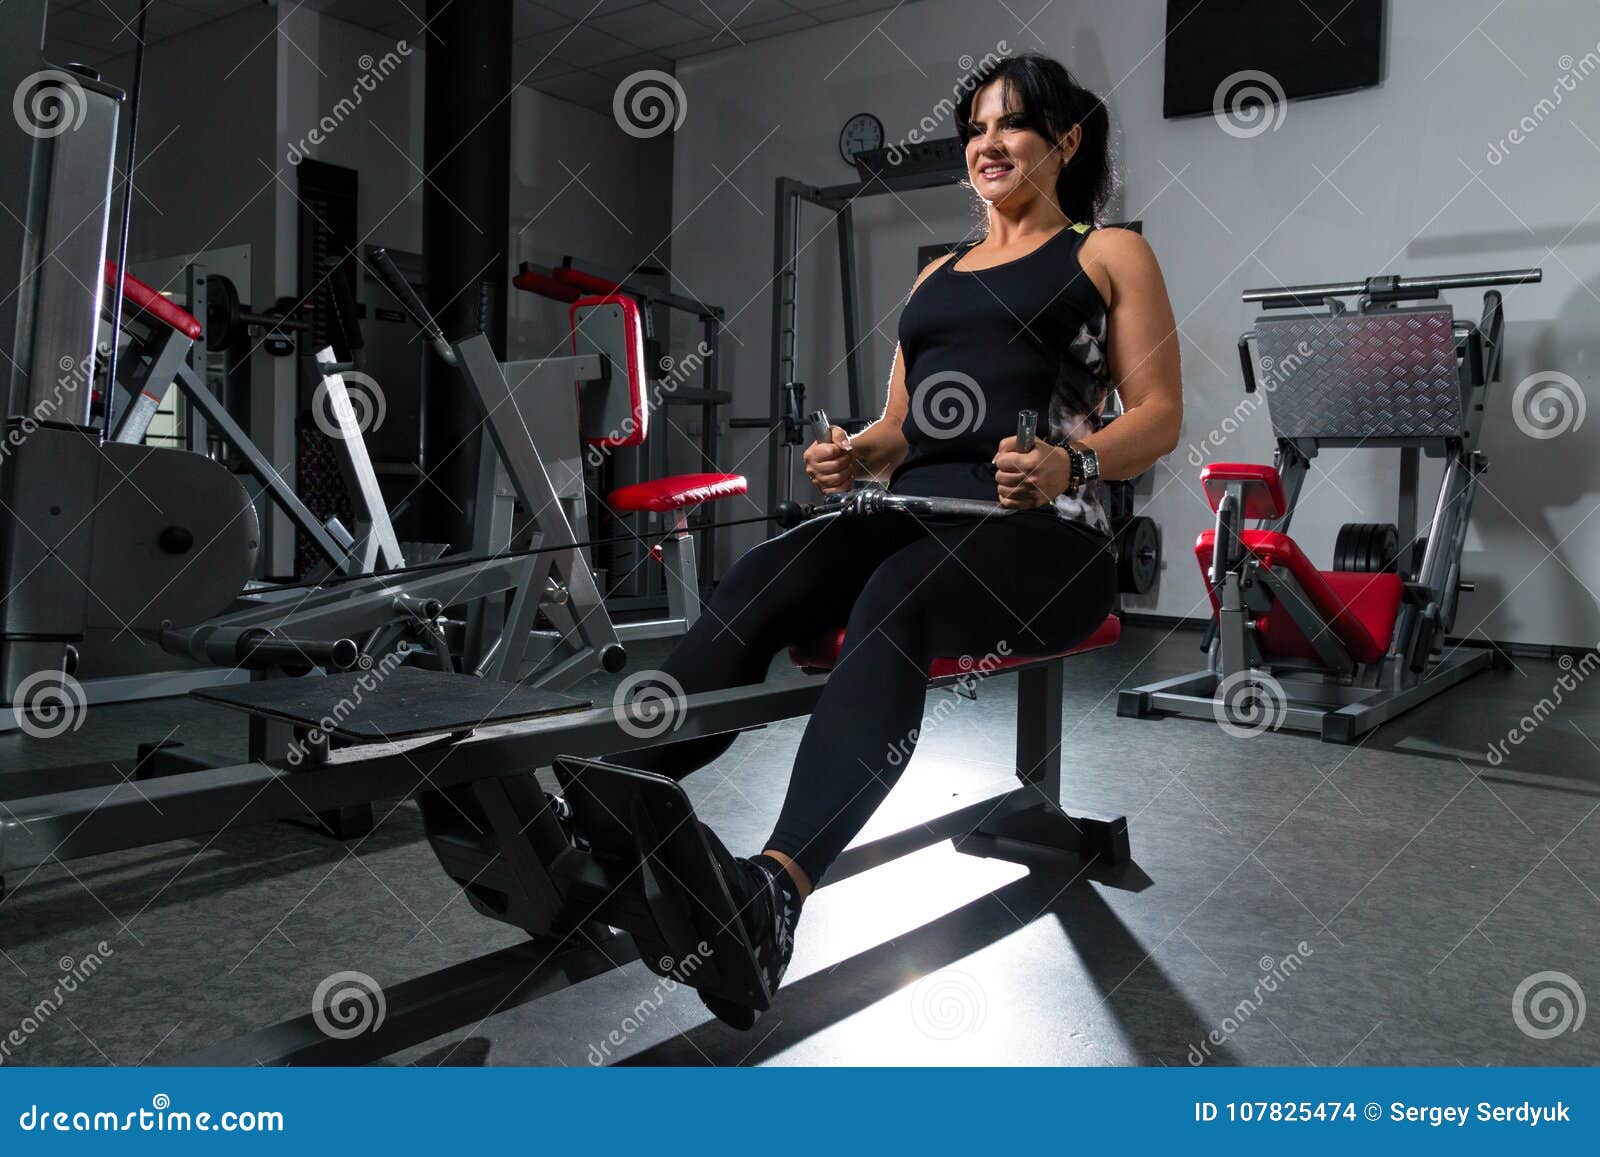 Woman plus size in gym doing exercises with running training